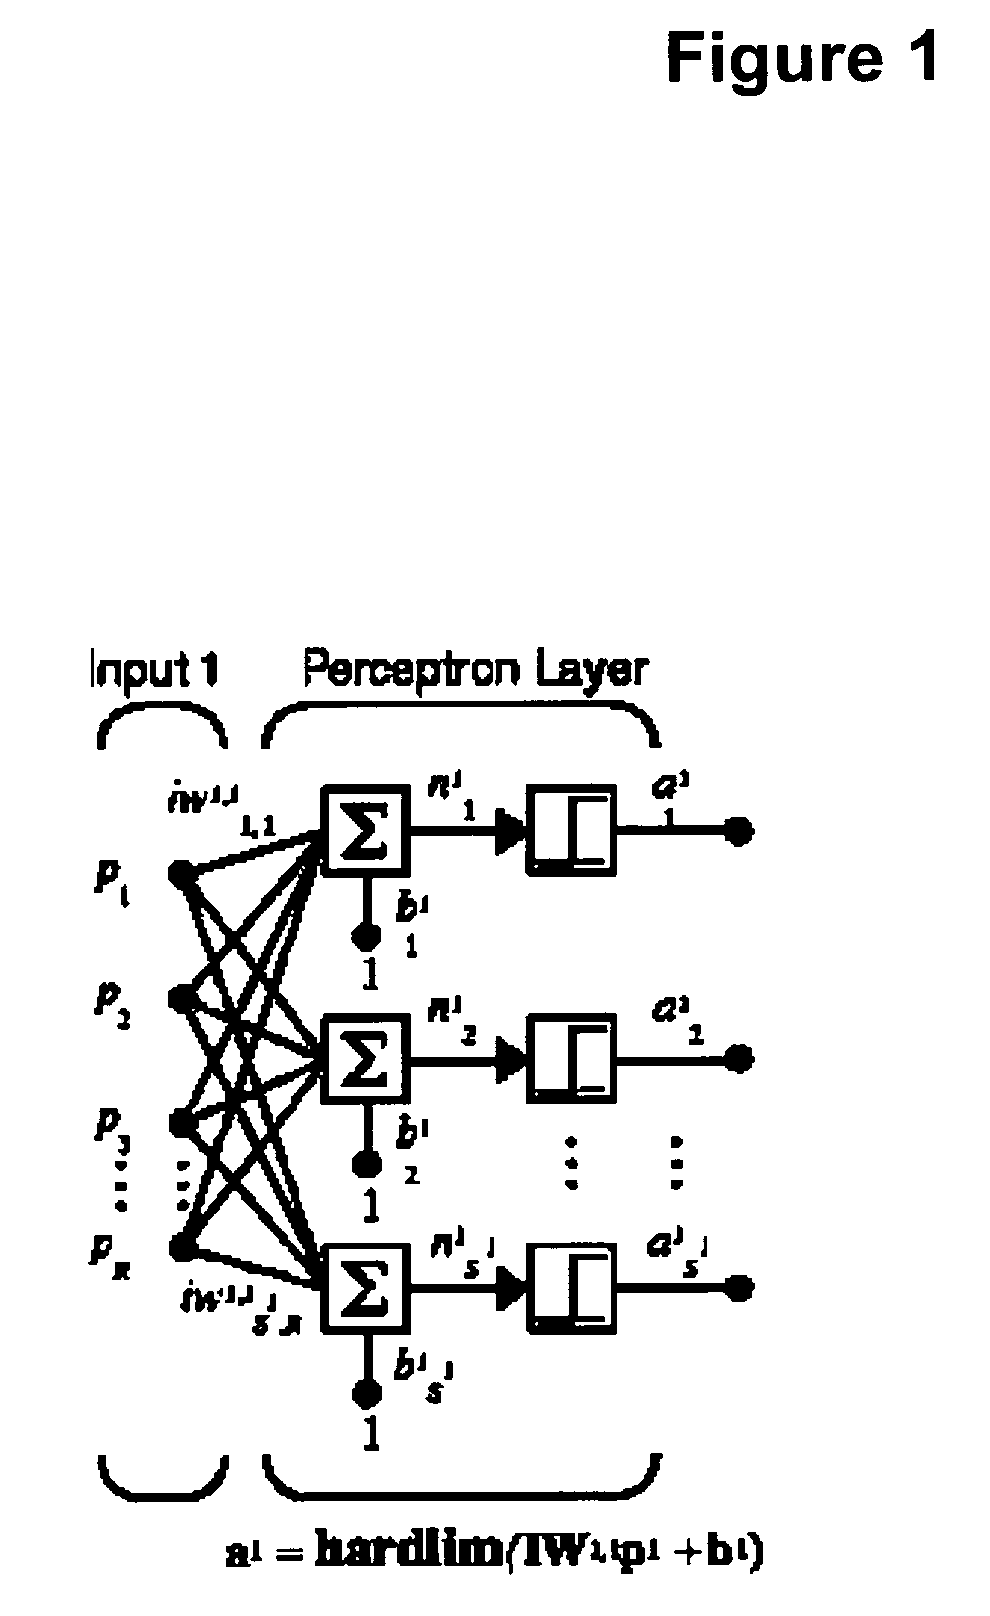 Neural network resource sizing apparatus for database applications